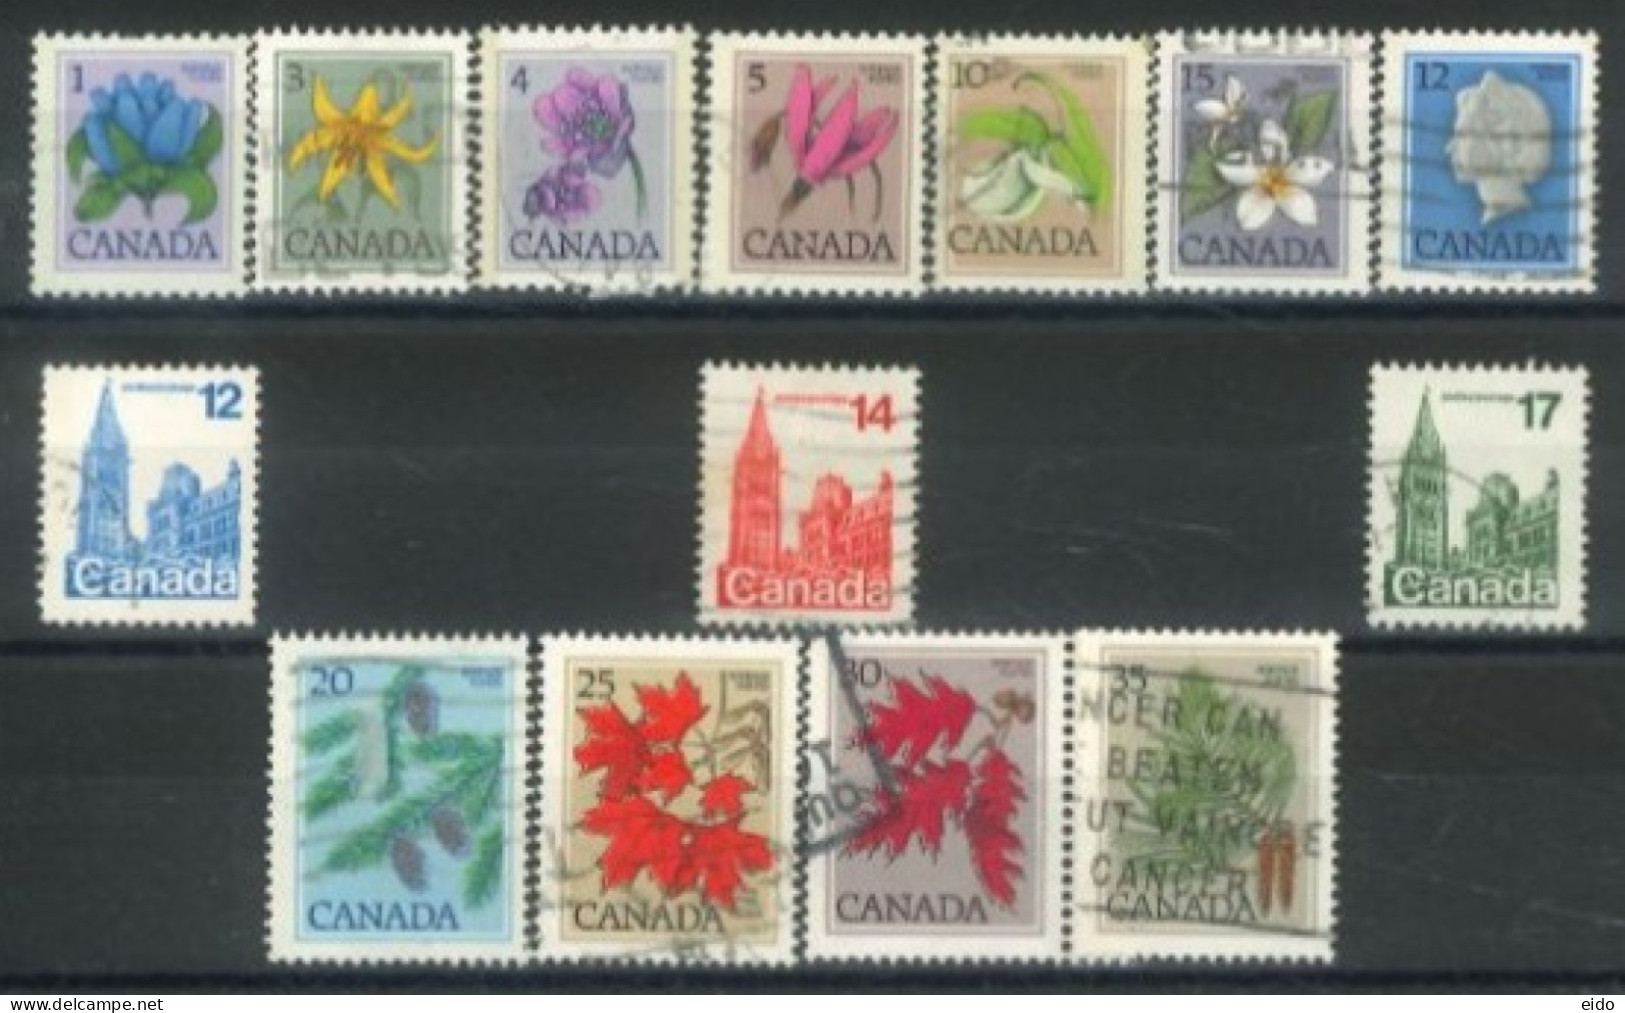 CANADA - 1977, QUEEN ELIZABETH II, HOUSE OF PARLIAMENT, FLOWERS & LEAVES STAMPS SET OF 14, USED. - Usati